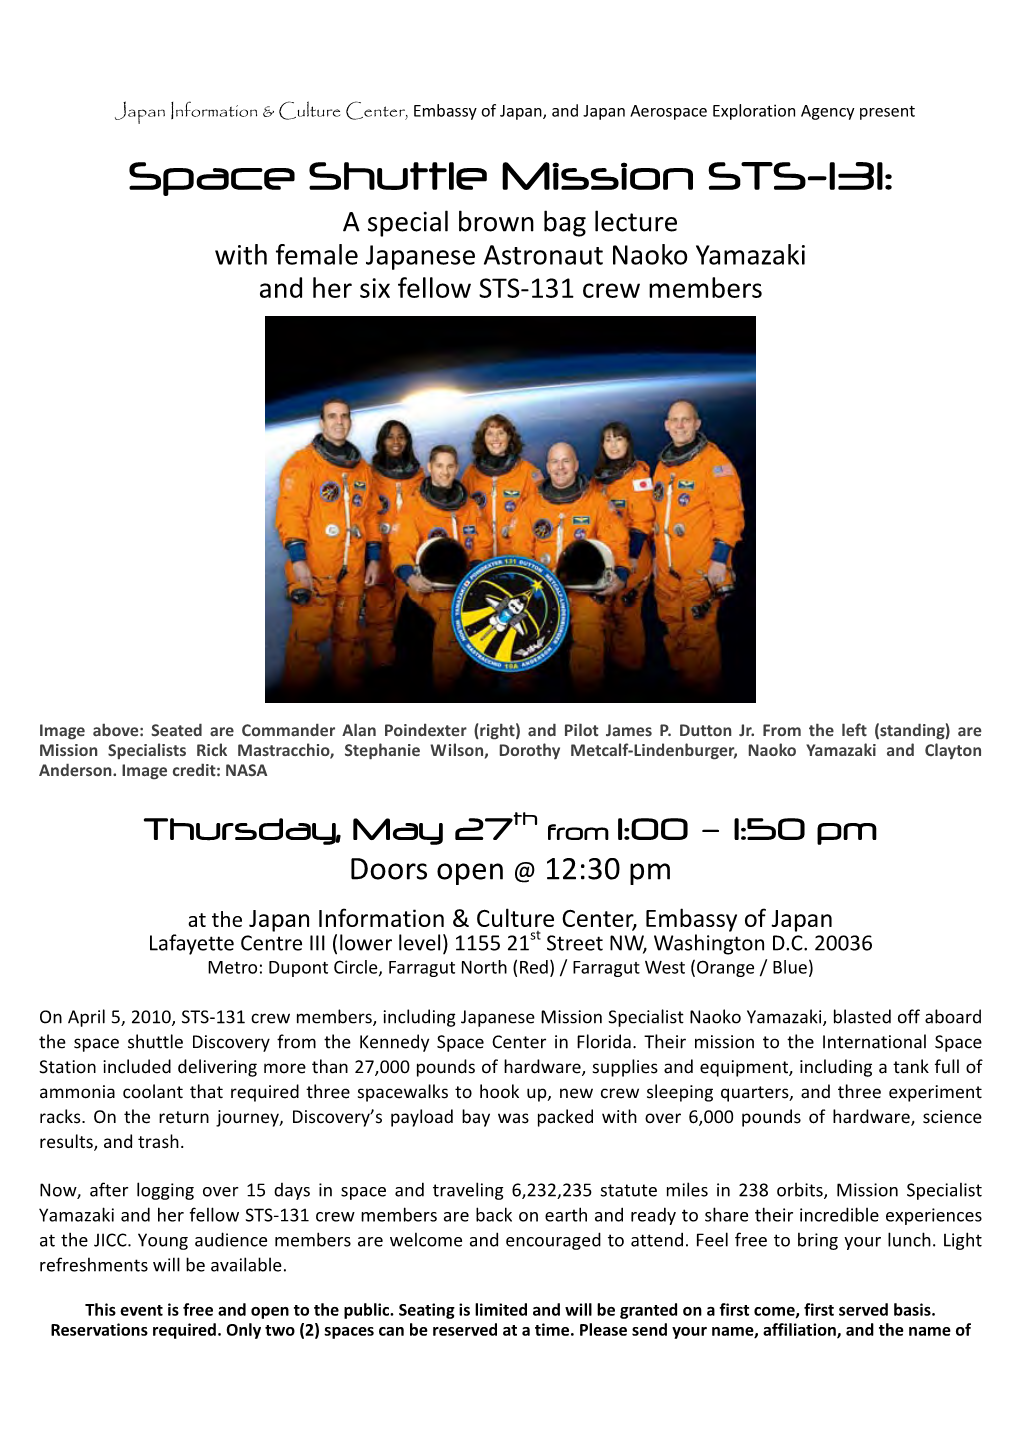 Space Shuttle Mission STS-131: a Special Brown Bag Lecture with Female Japanese Astronaut Naoko Yamazaki and Her Six Fellow STS‐131 Crew Members